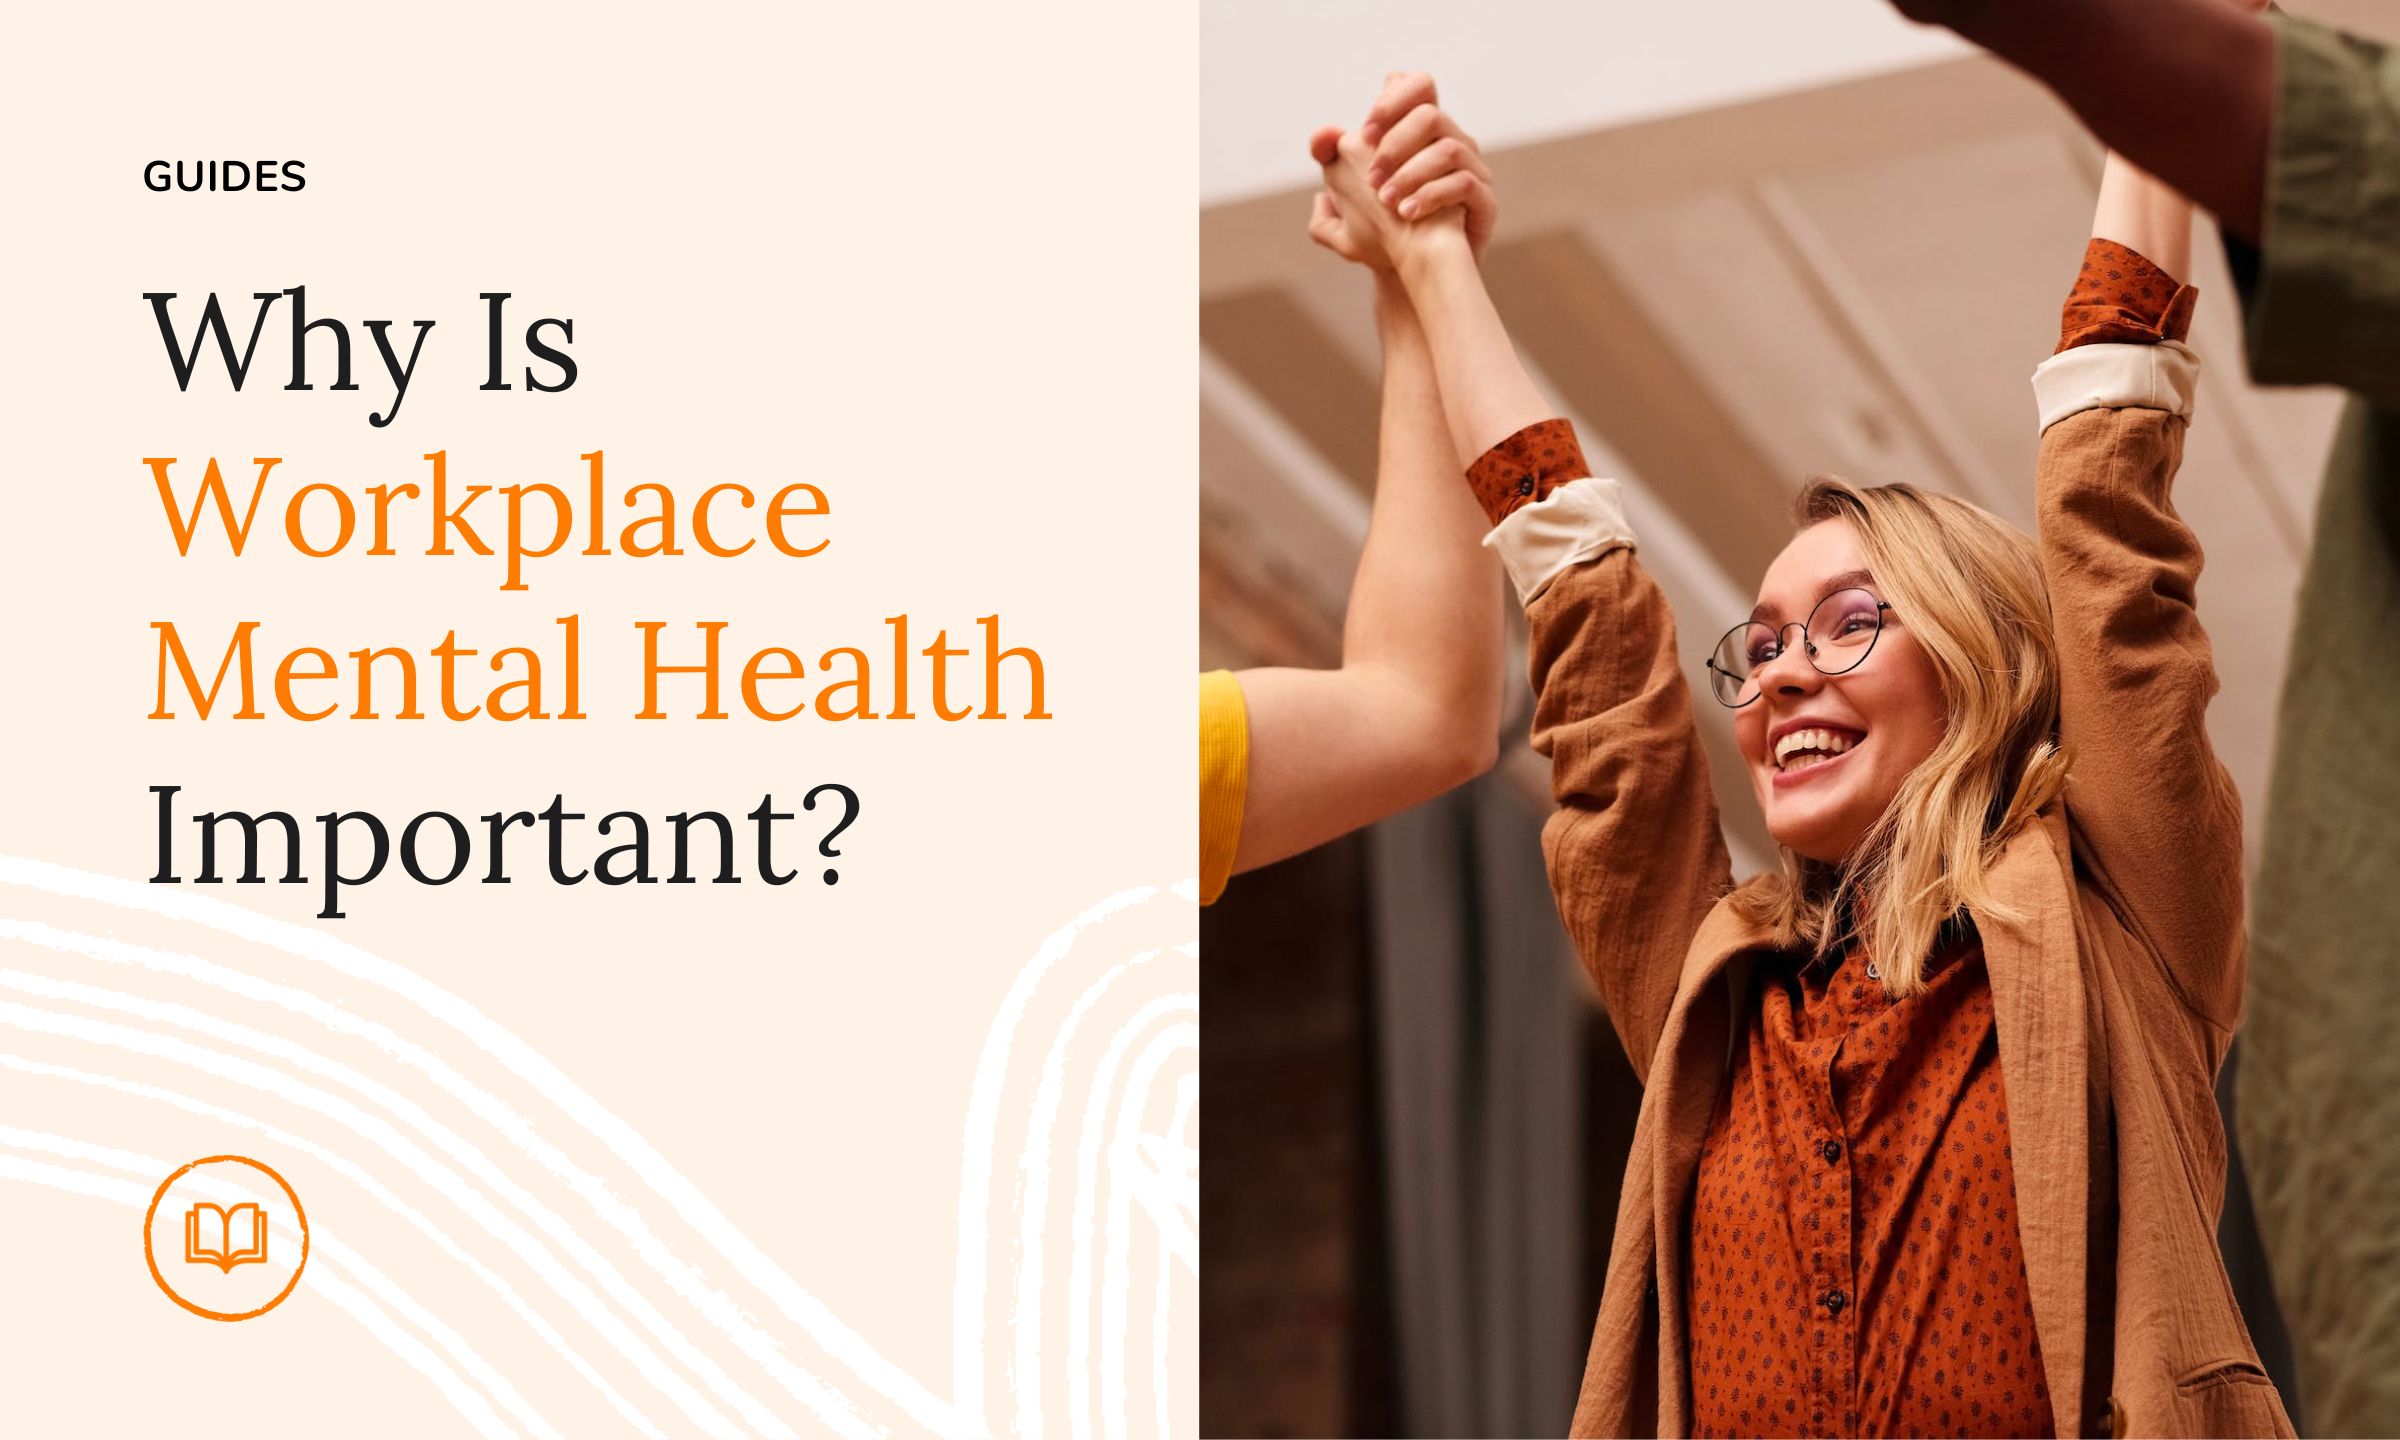 Why Is Workplace Mental Health Important?